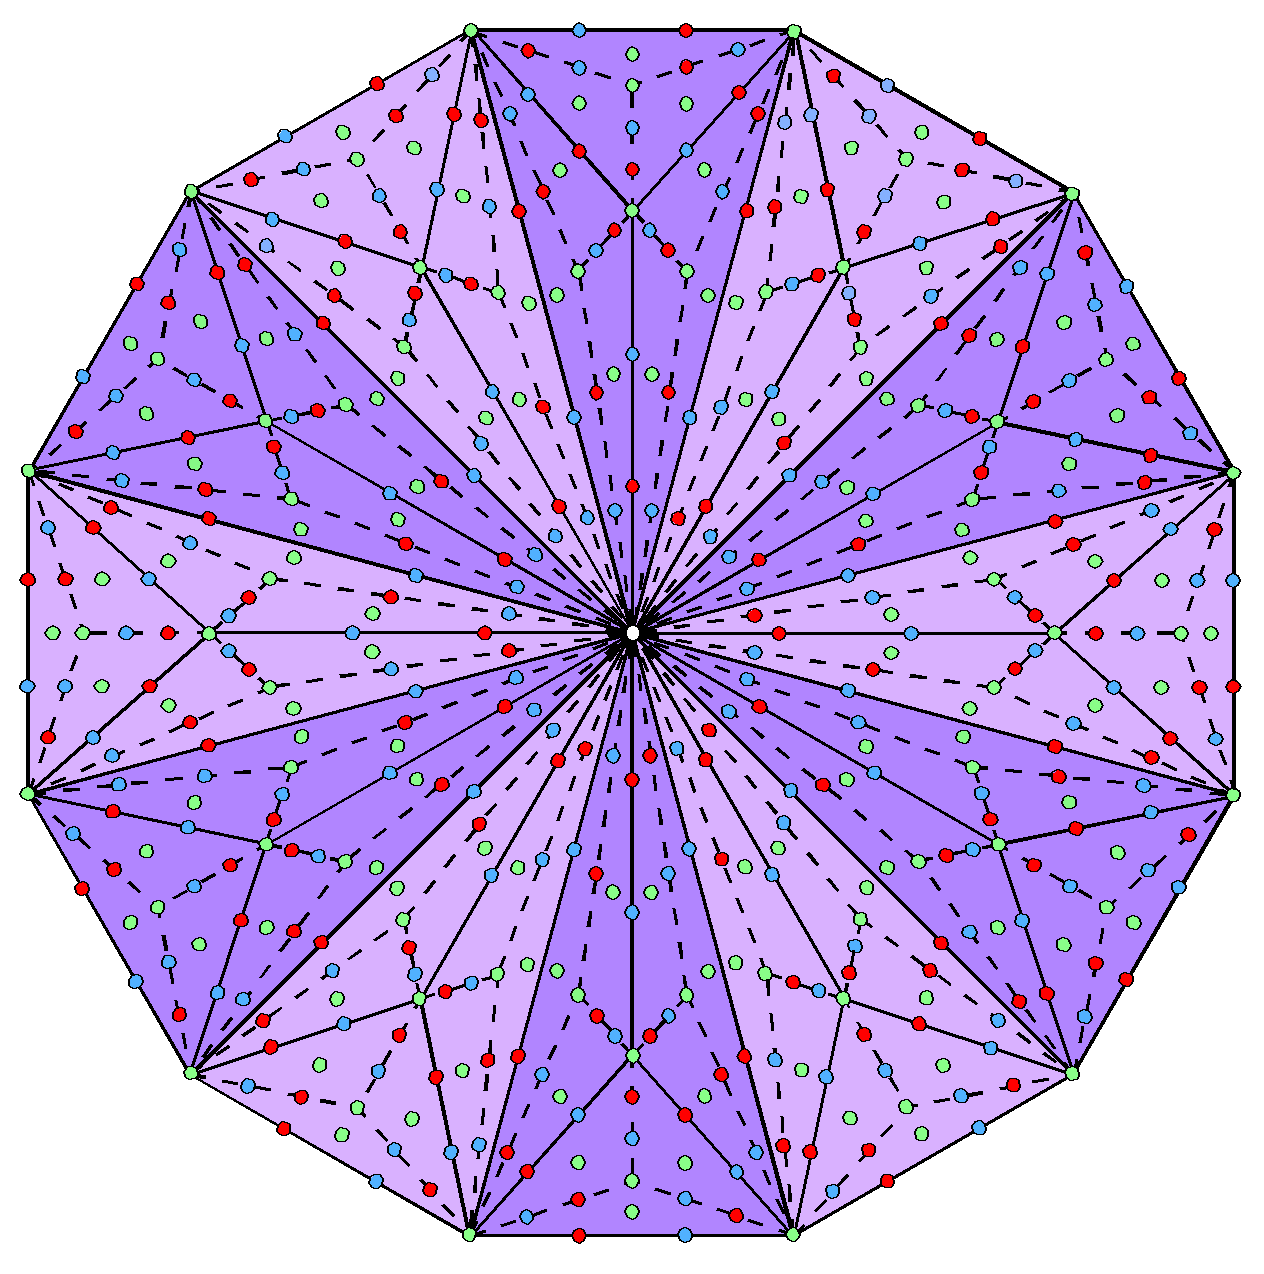 504 yods in Type C dodecagon